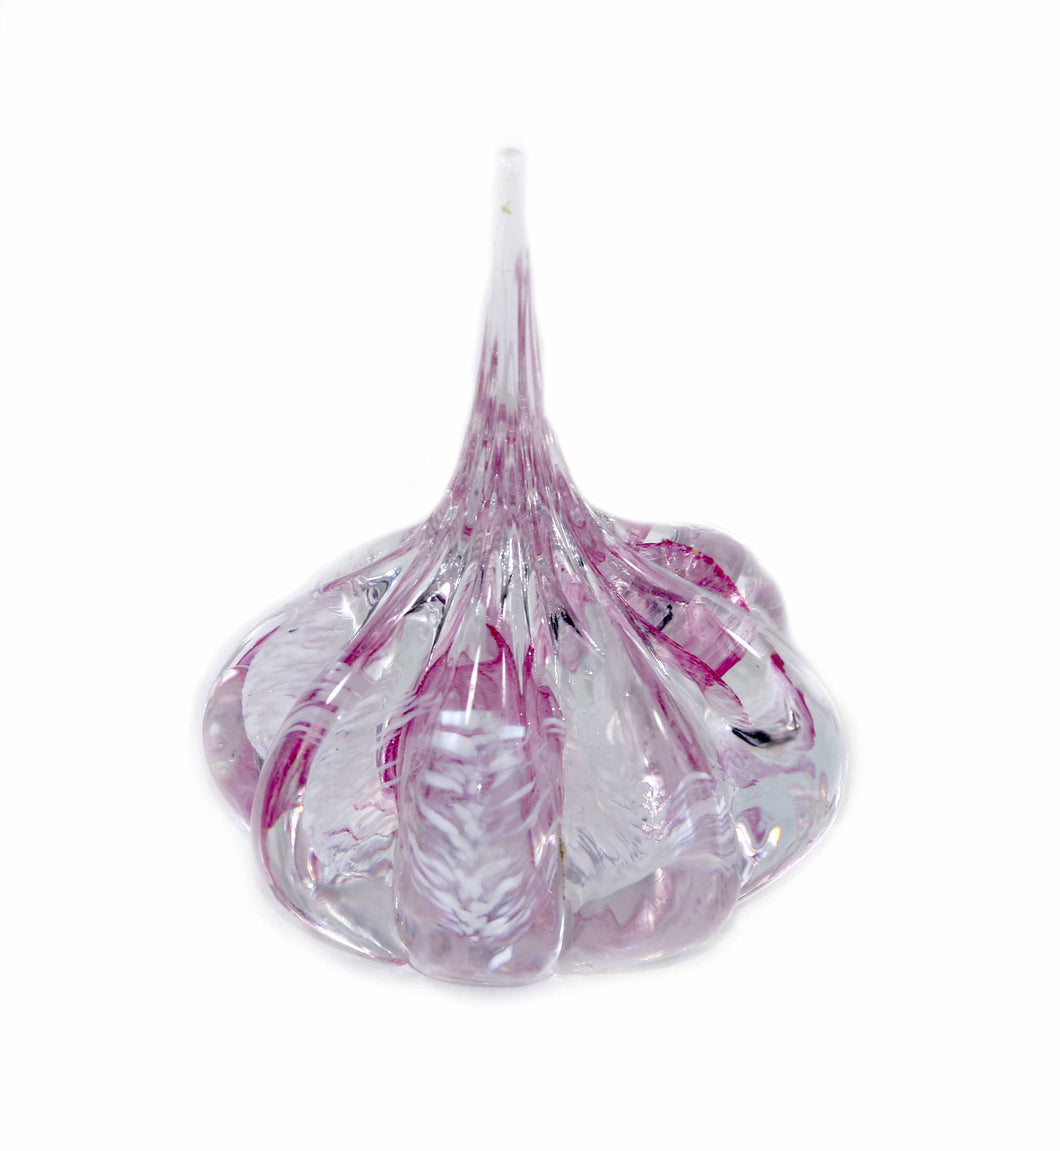 Vintage pink & clear garlic bulb ring holder teardrop solid glass paperweight